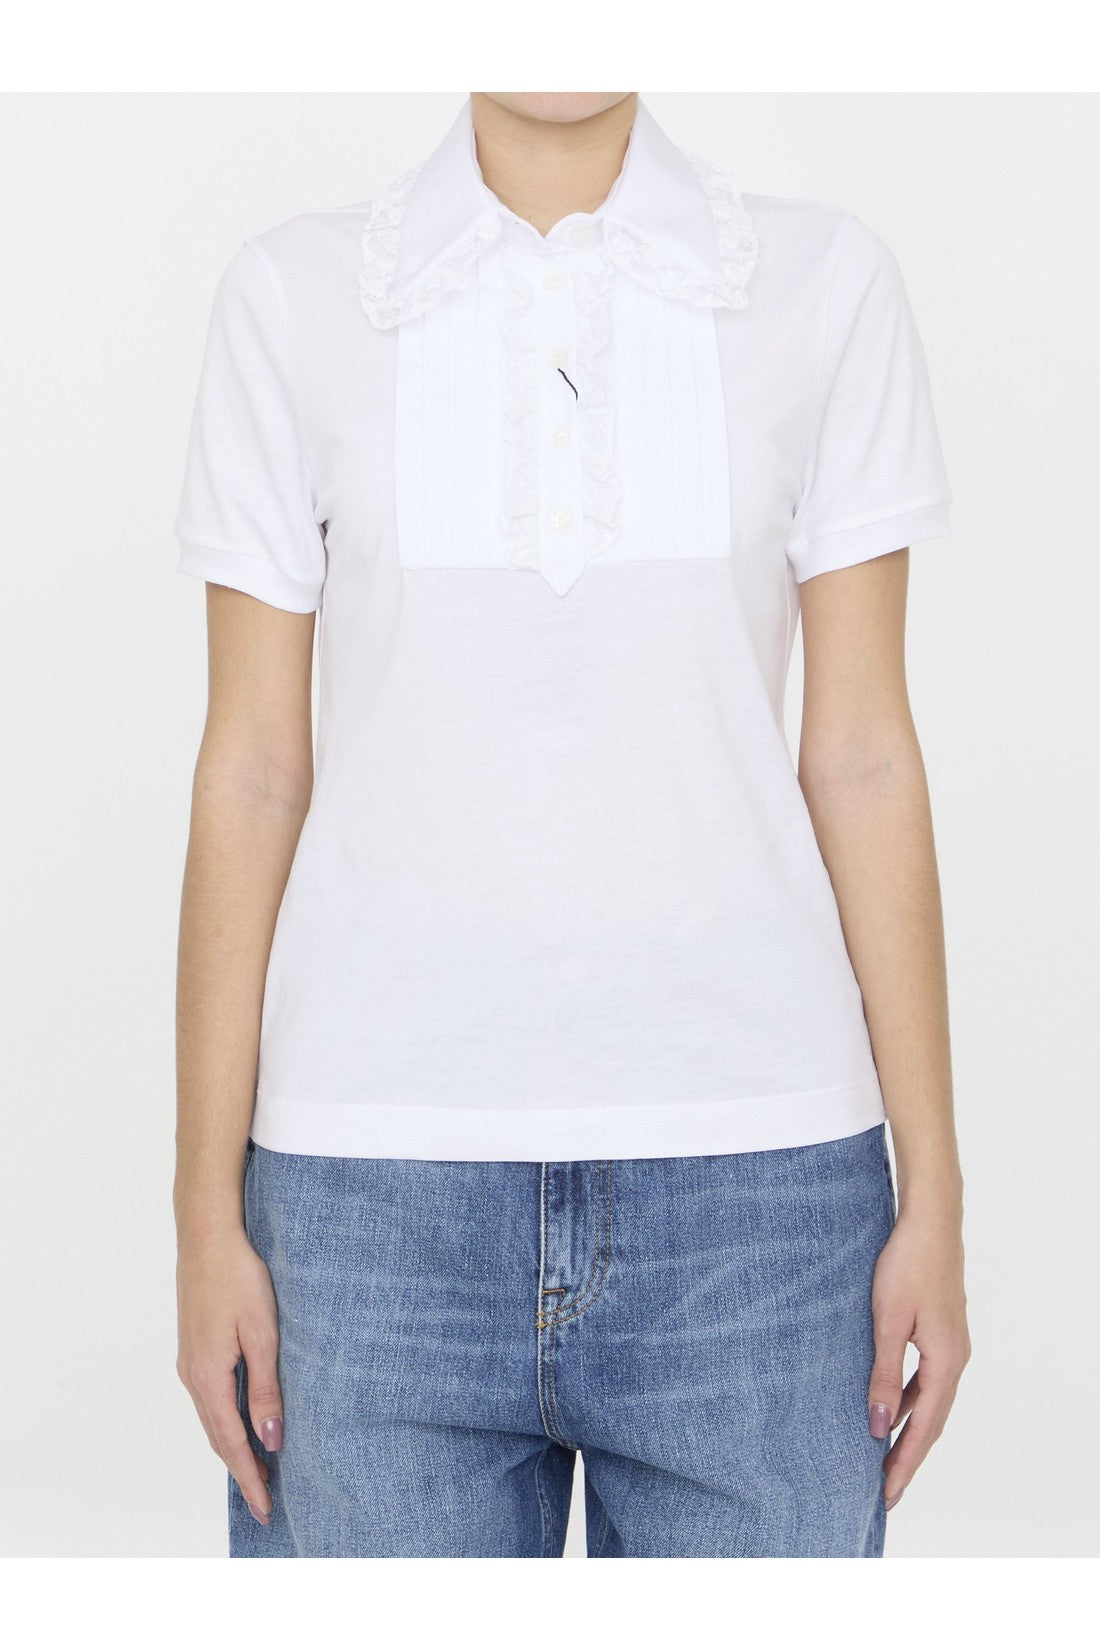 Cotton t-shirt with lace